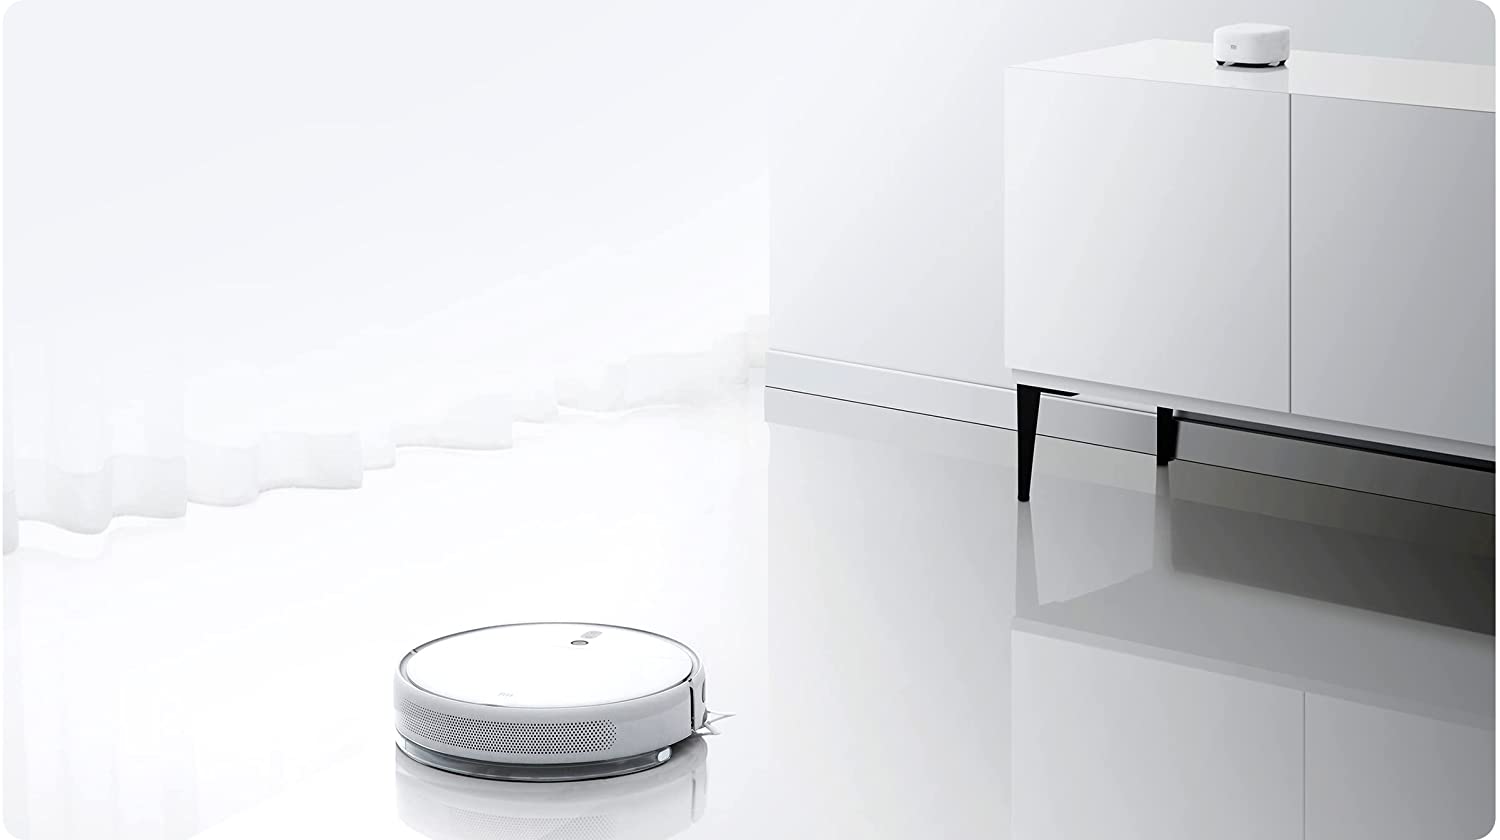 Xiaomi Mi Robot Vacuum Mop 2 EU Powerful suction of 2700Pa,Upgraded pressurized mopping and smart interactive features,Up to 110 minute battery life White